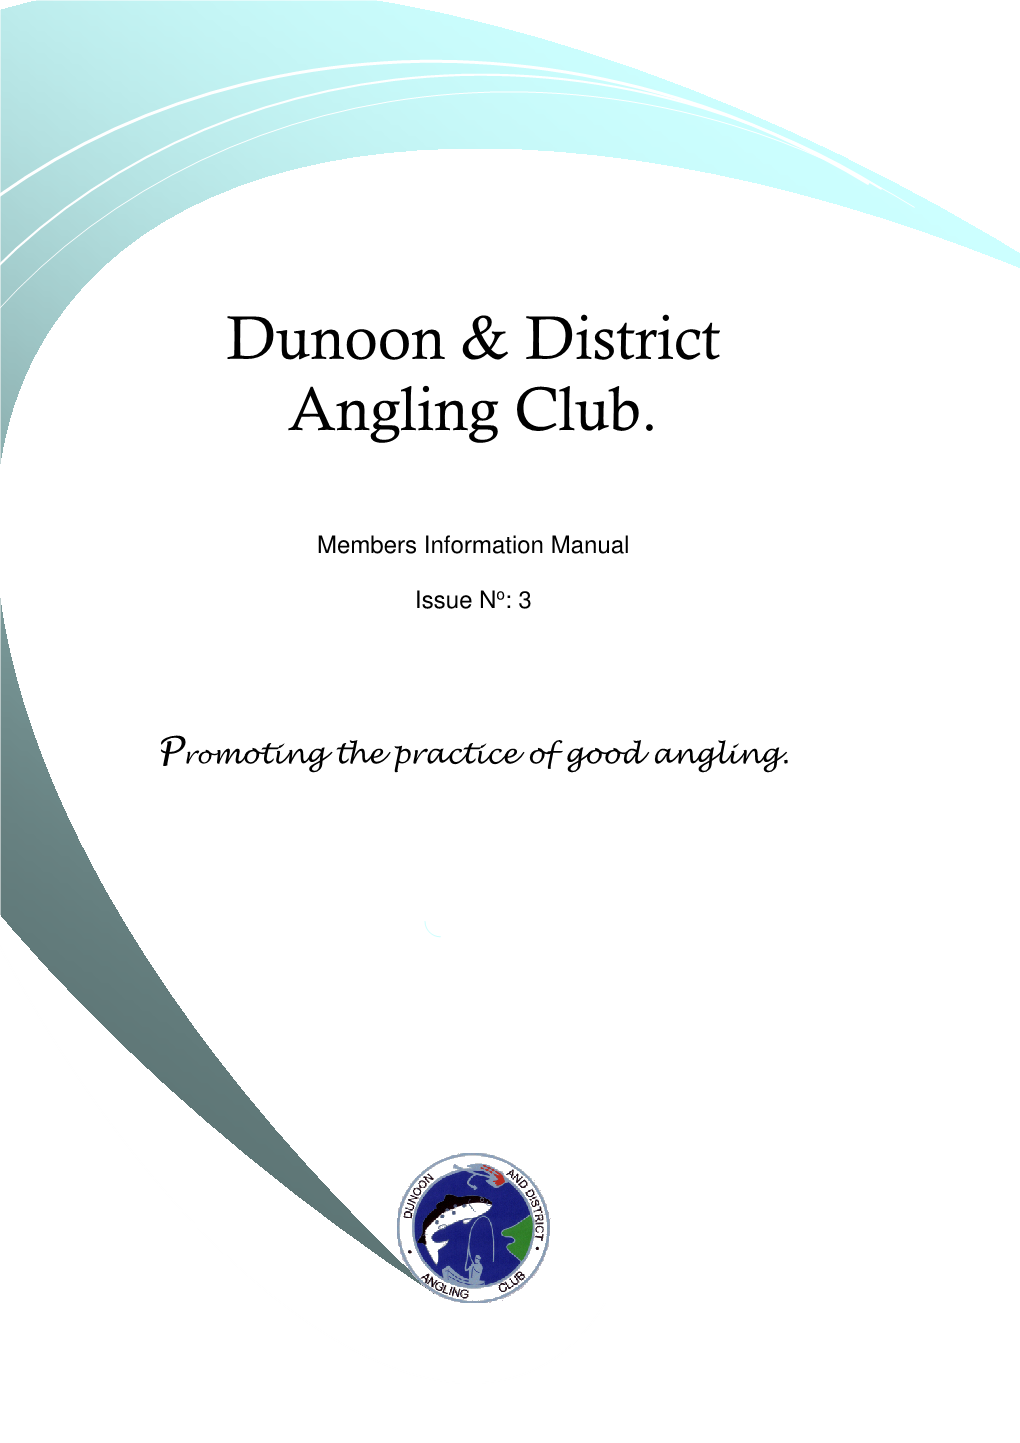 Dunoon & District Angling Club